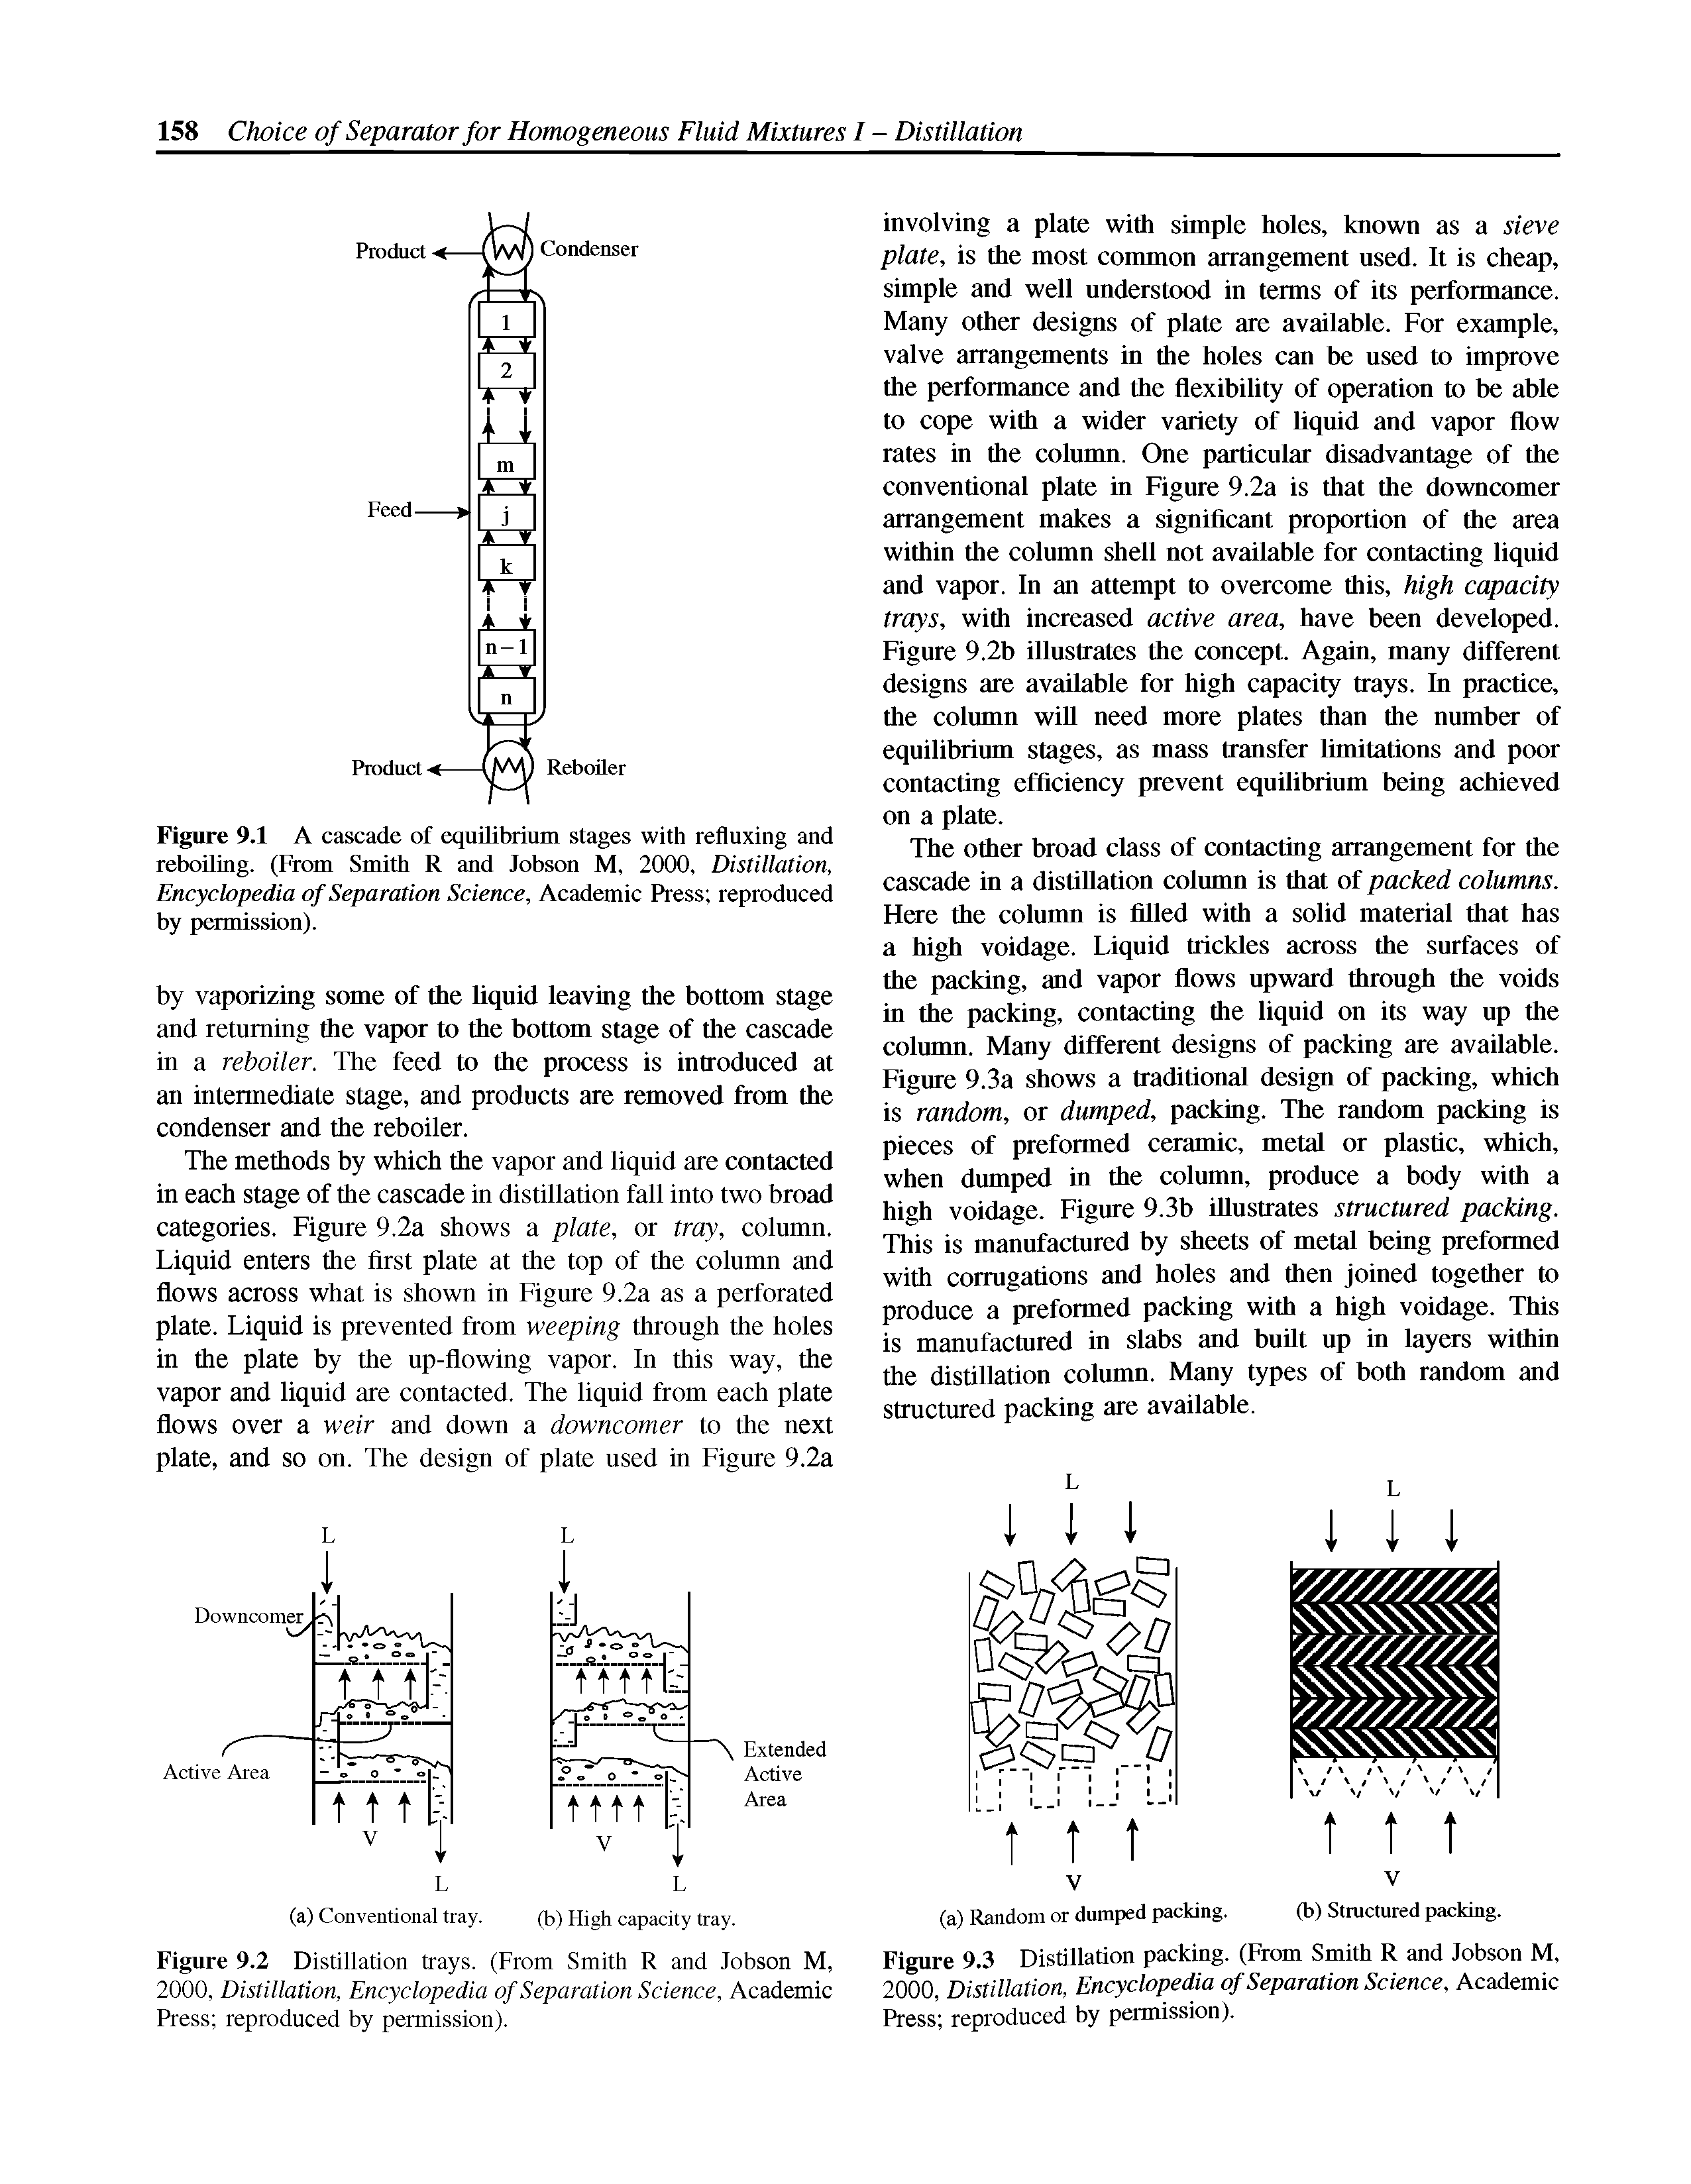 Figure 9.1 A cascade of equilibrium stages with refluxing and reboiling. (From Smith R and Jobson M, 2000, Distillation, Encyclopedia of Separation Science, Academic Press reproduced by permission).